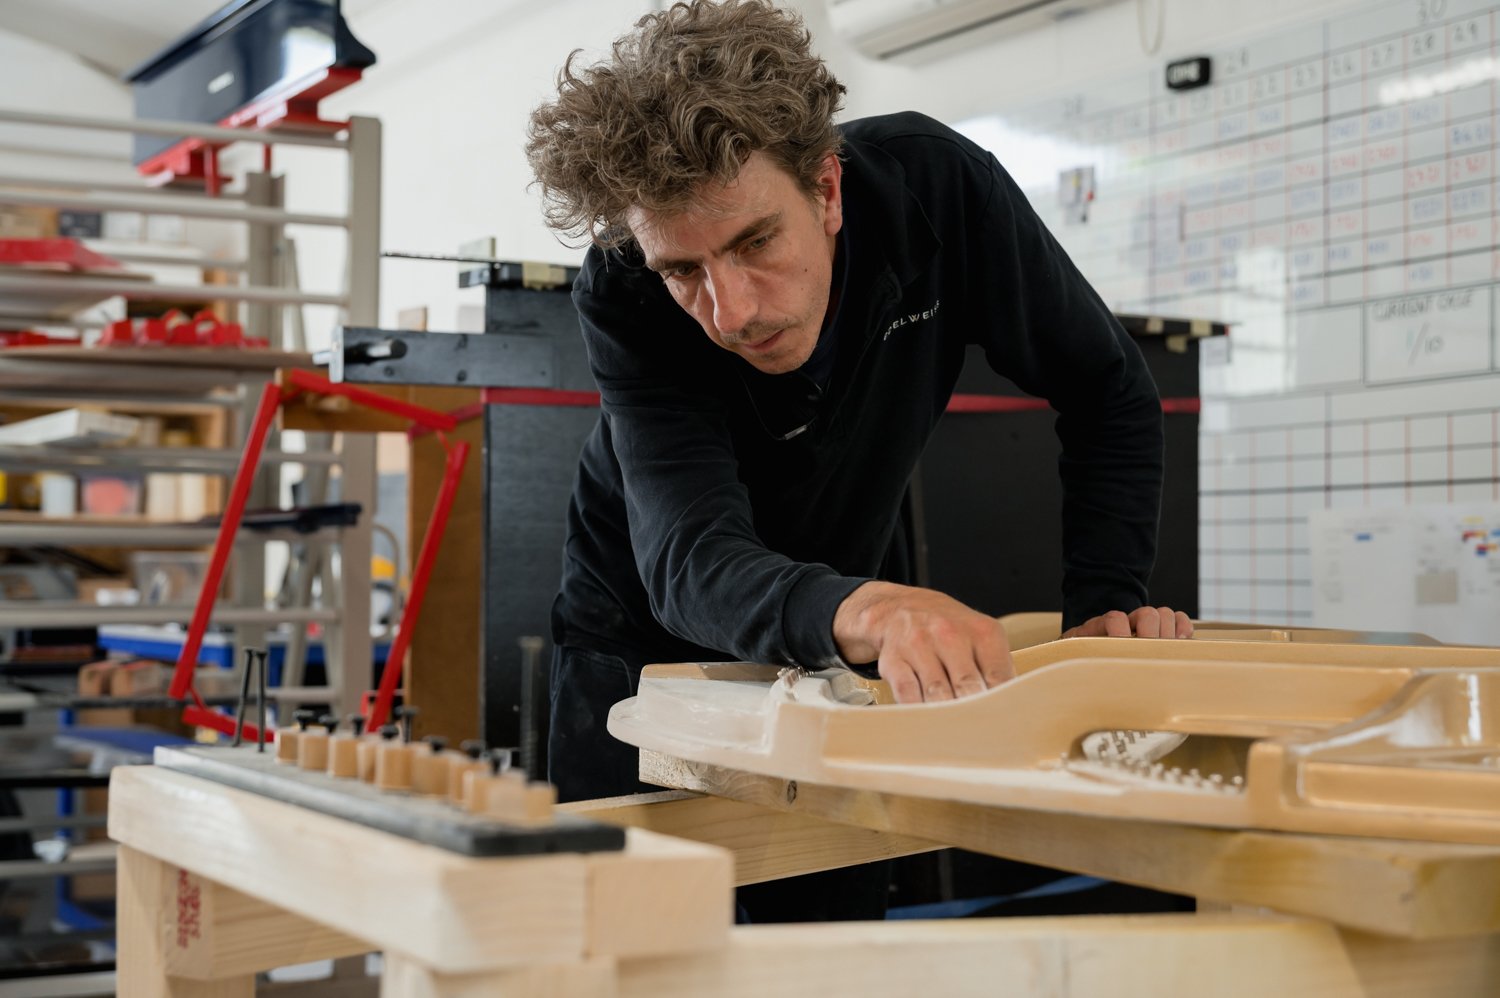  An artisan from Edelweiss Pianos working in the piano workshop in Cambridge, UK. 